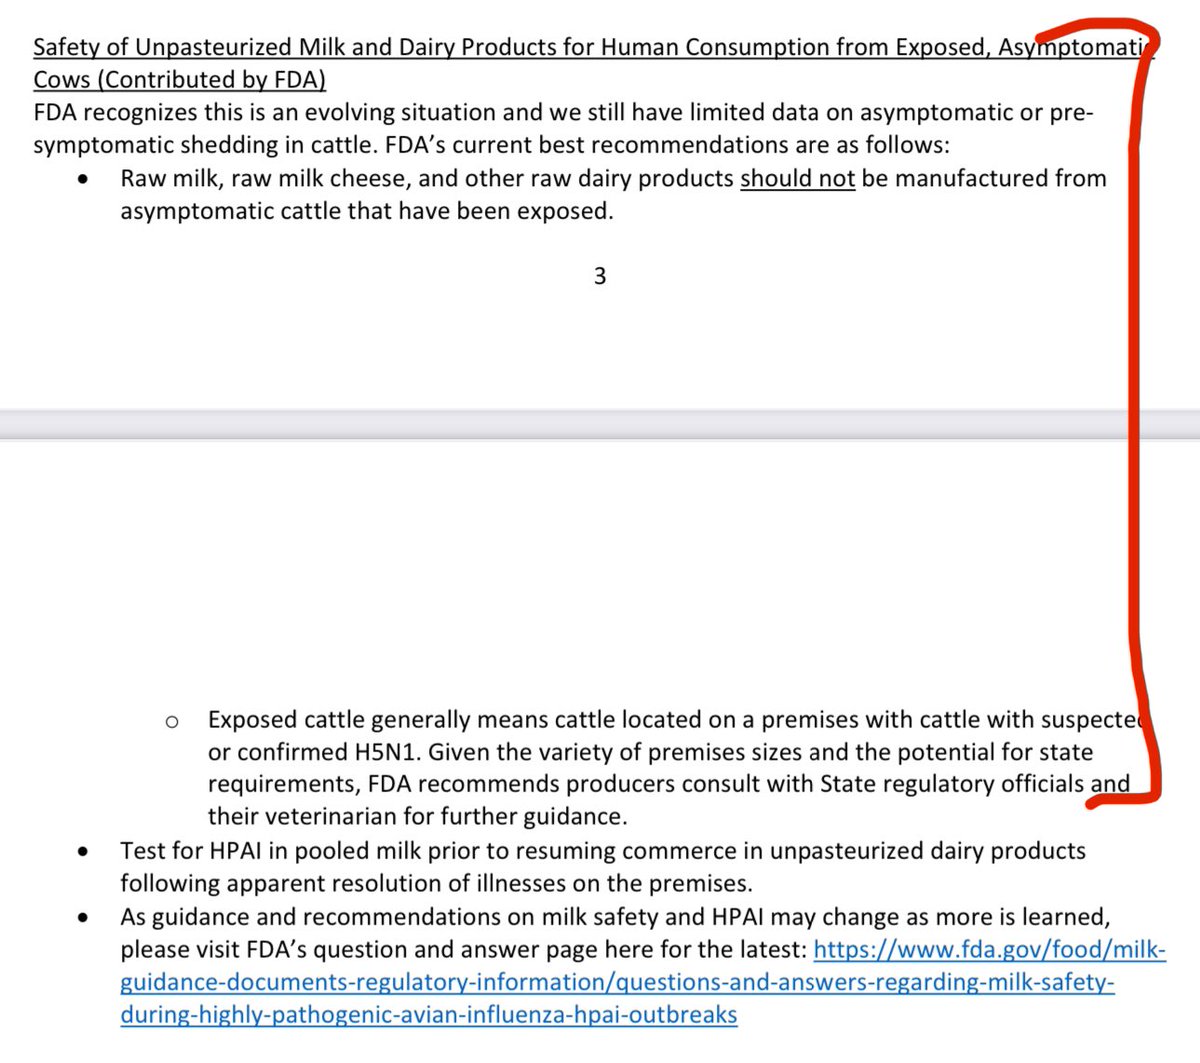 The USDA & FDA currently admit they have no idea about possible #avianflu virus shedding / transmission among asymptomatic cows, or exposed cows, which they define as any cattle located on a premises with cattle with suspected/confirmed H5N1 virus—basically the rest of the herd…